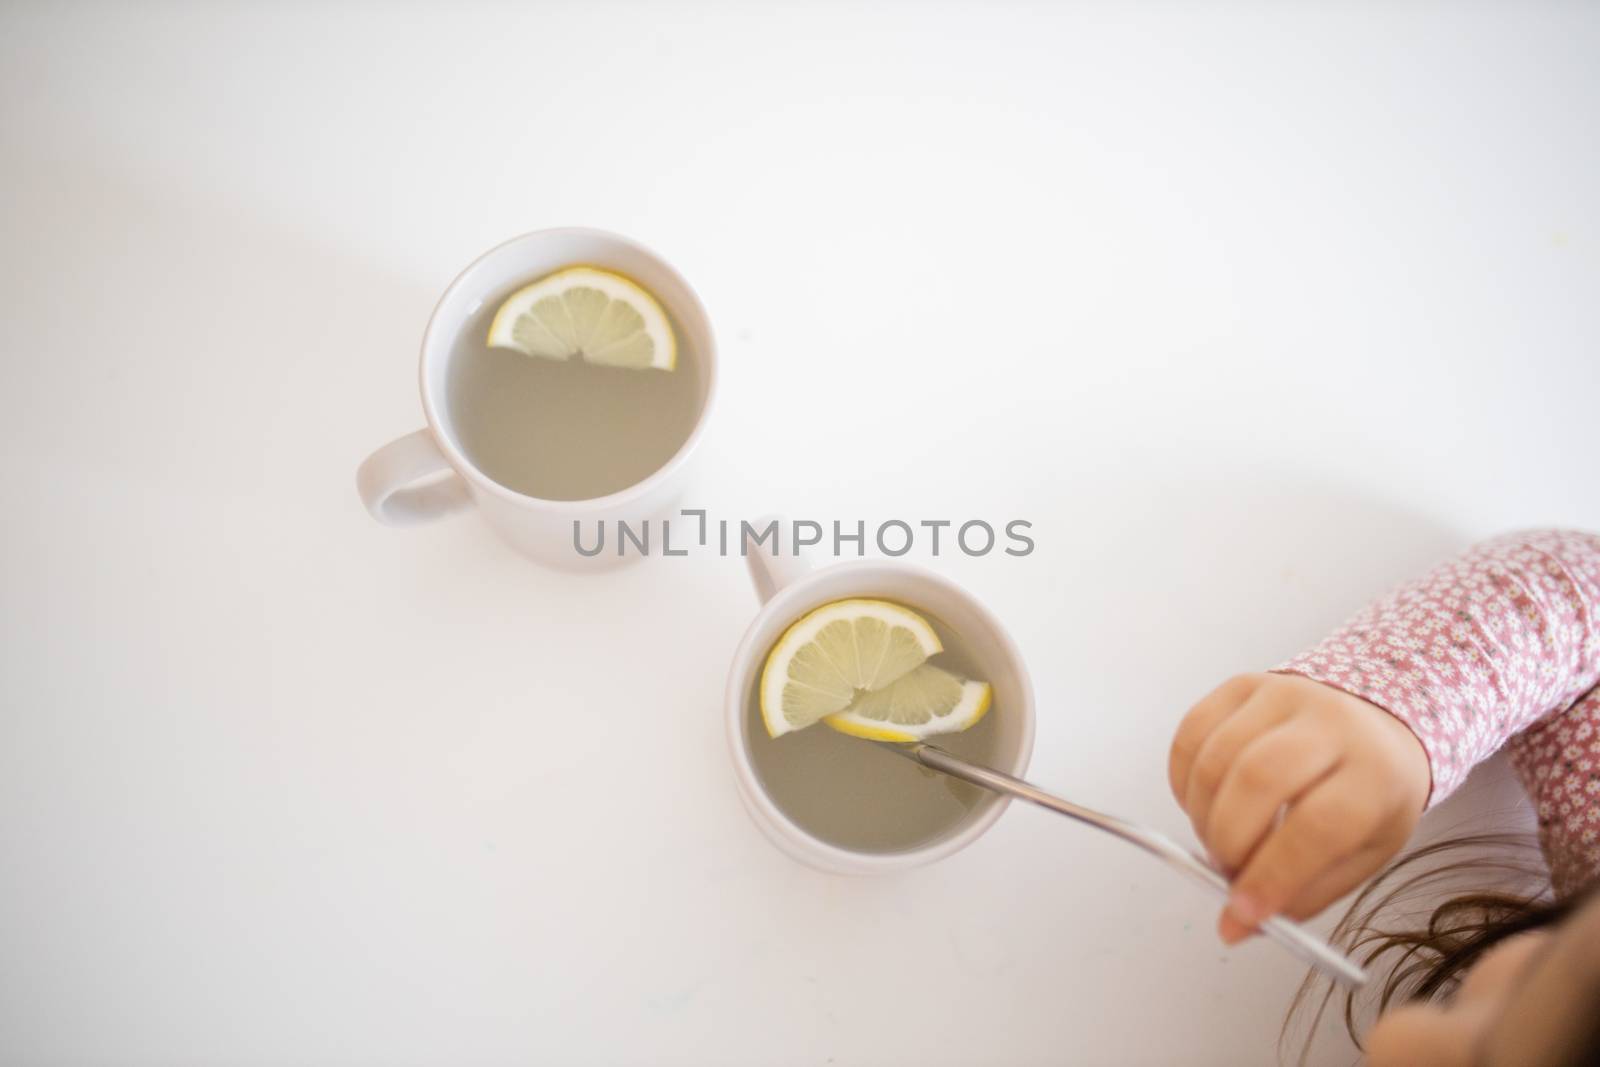 Little girl at table from above drinking cup of lemon tea through a straw. Young child sipping lemon-flavored drink. Sweet citric beverages